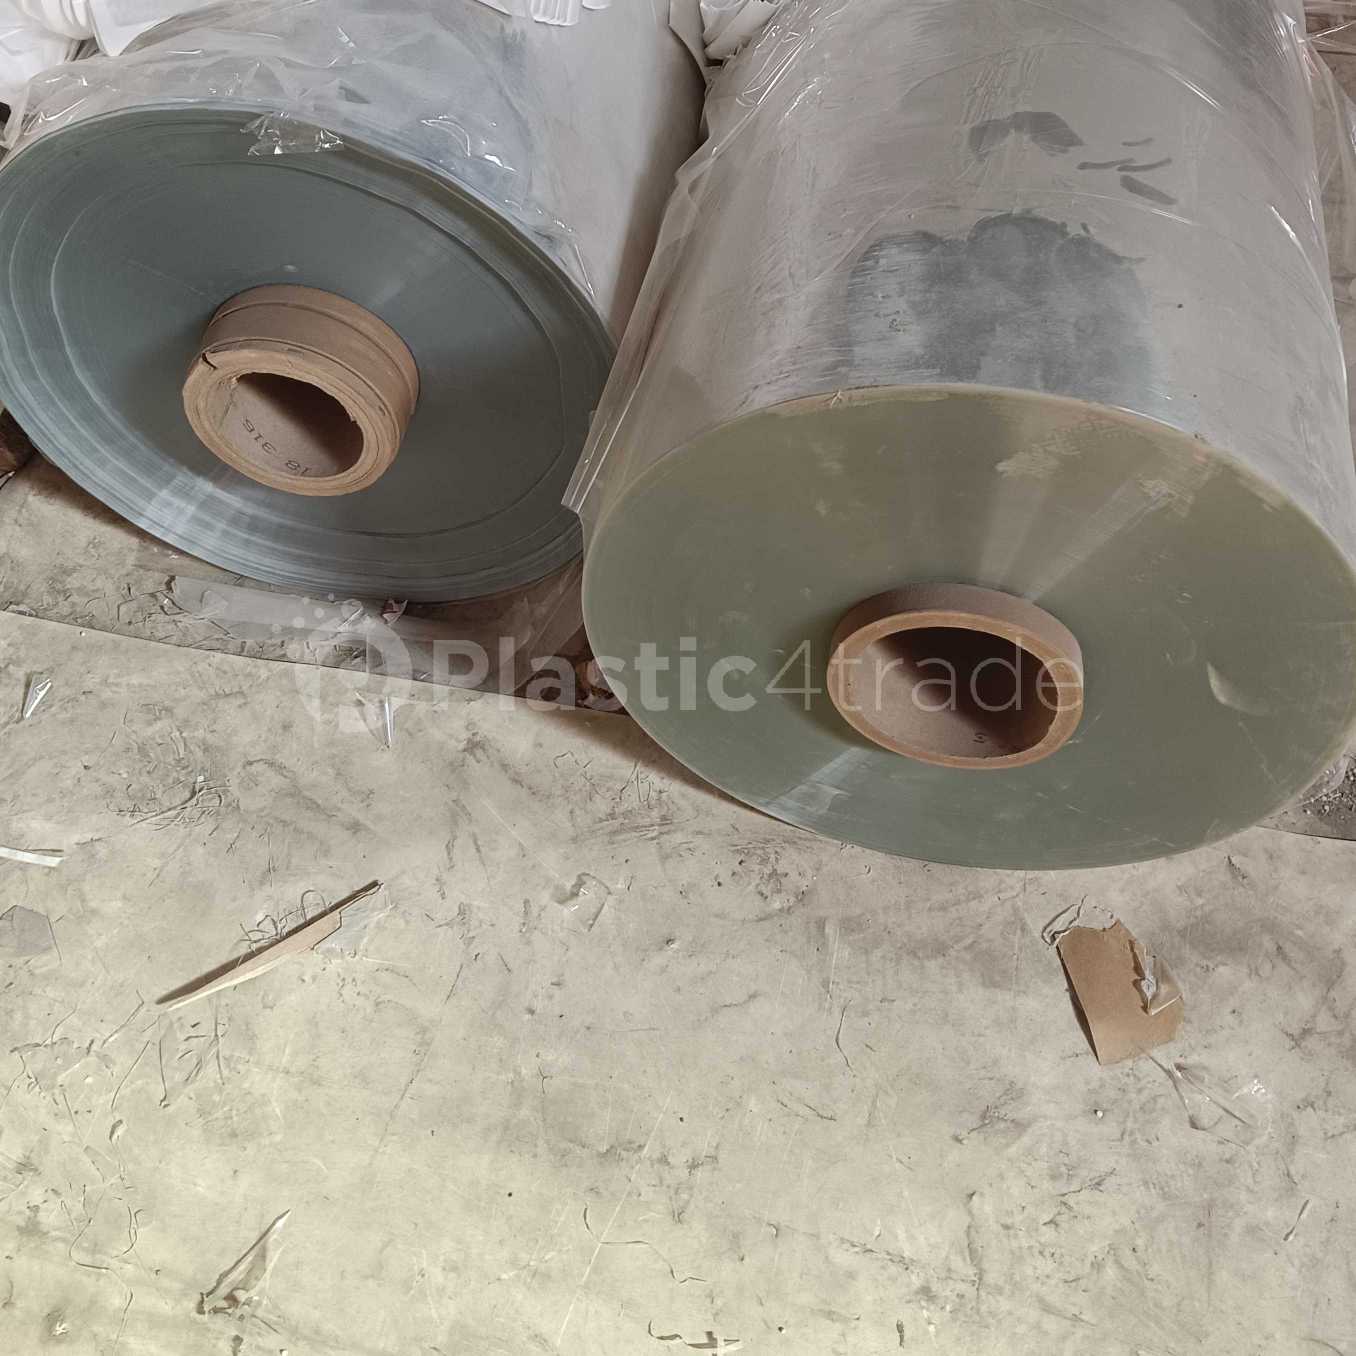 ONE SIDE SILICONE COATED POLYESTER FILM POLYESTER Rolls Film Grade haryana india Plastic4trade